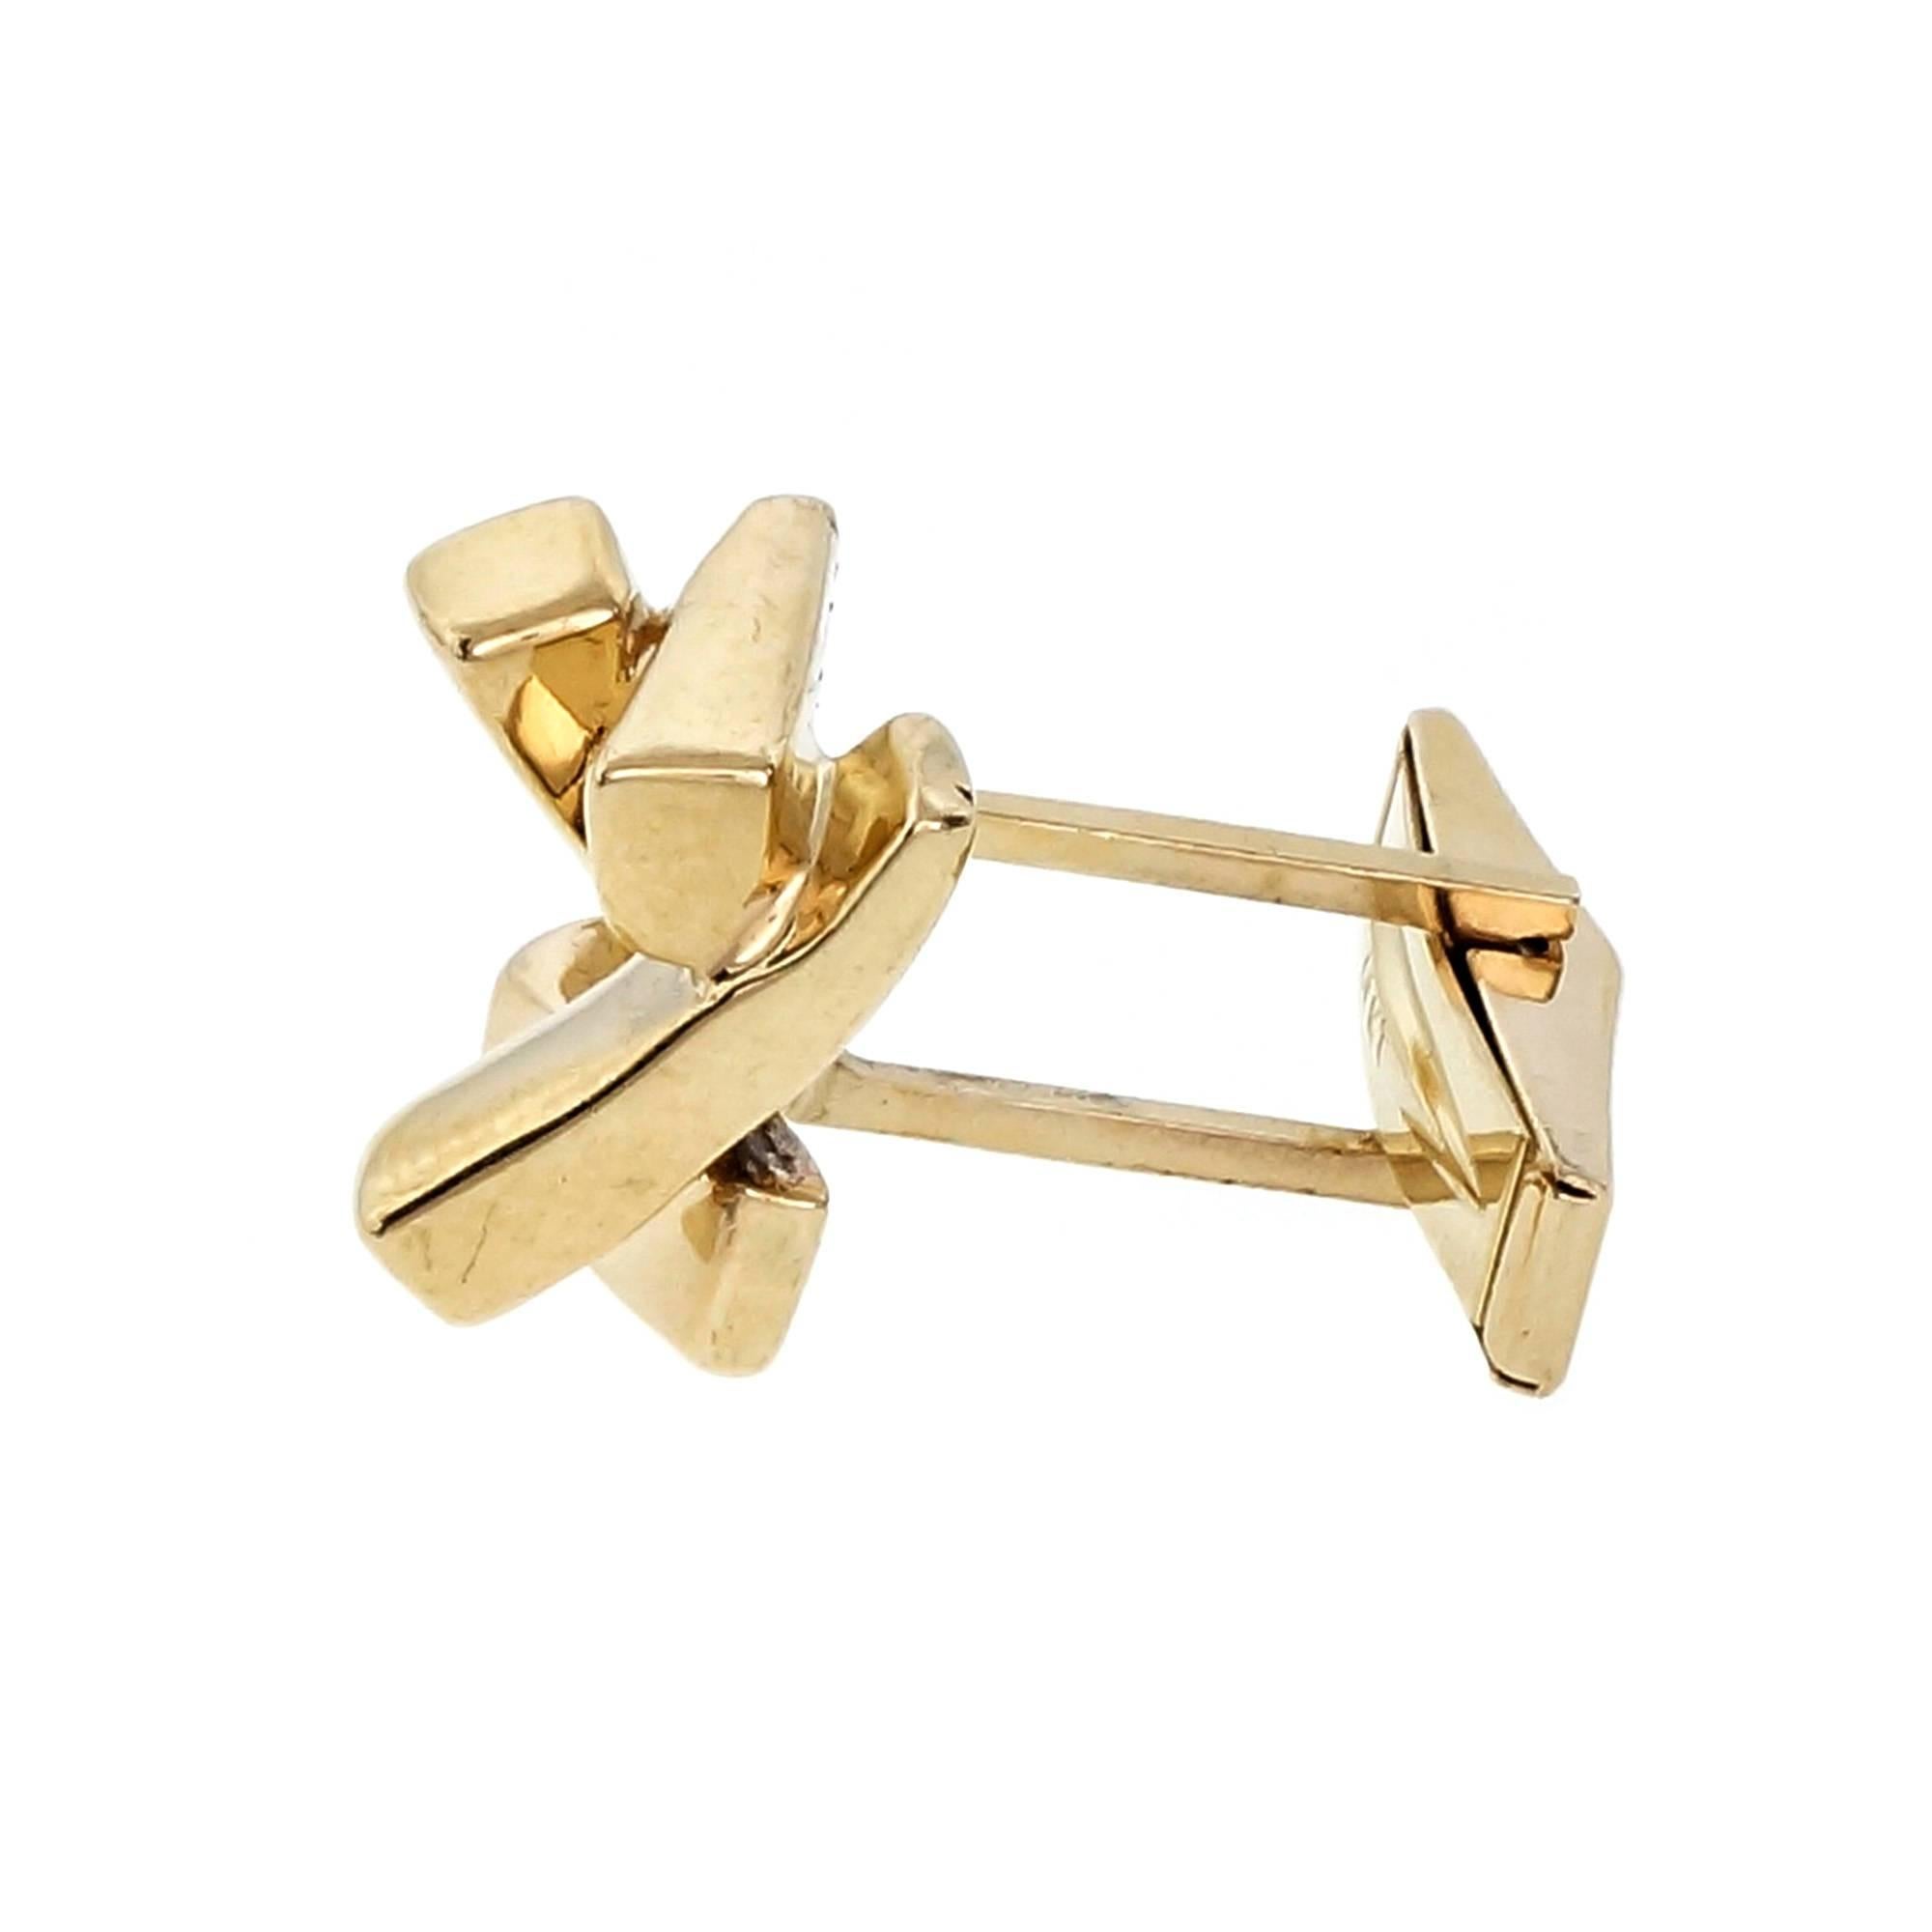 Estate mid-century 1950s geometric 3-D design solid 14k yellow gold cufflinks with secure clips.

14k yellow gold
Top to bottom: 12.12mm or .47 inch
Width: 12.3mm or .48 inch
Depth: 8.22mm
14.4 grams
Tested and stamped: 14k
